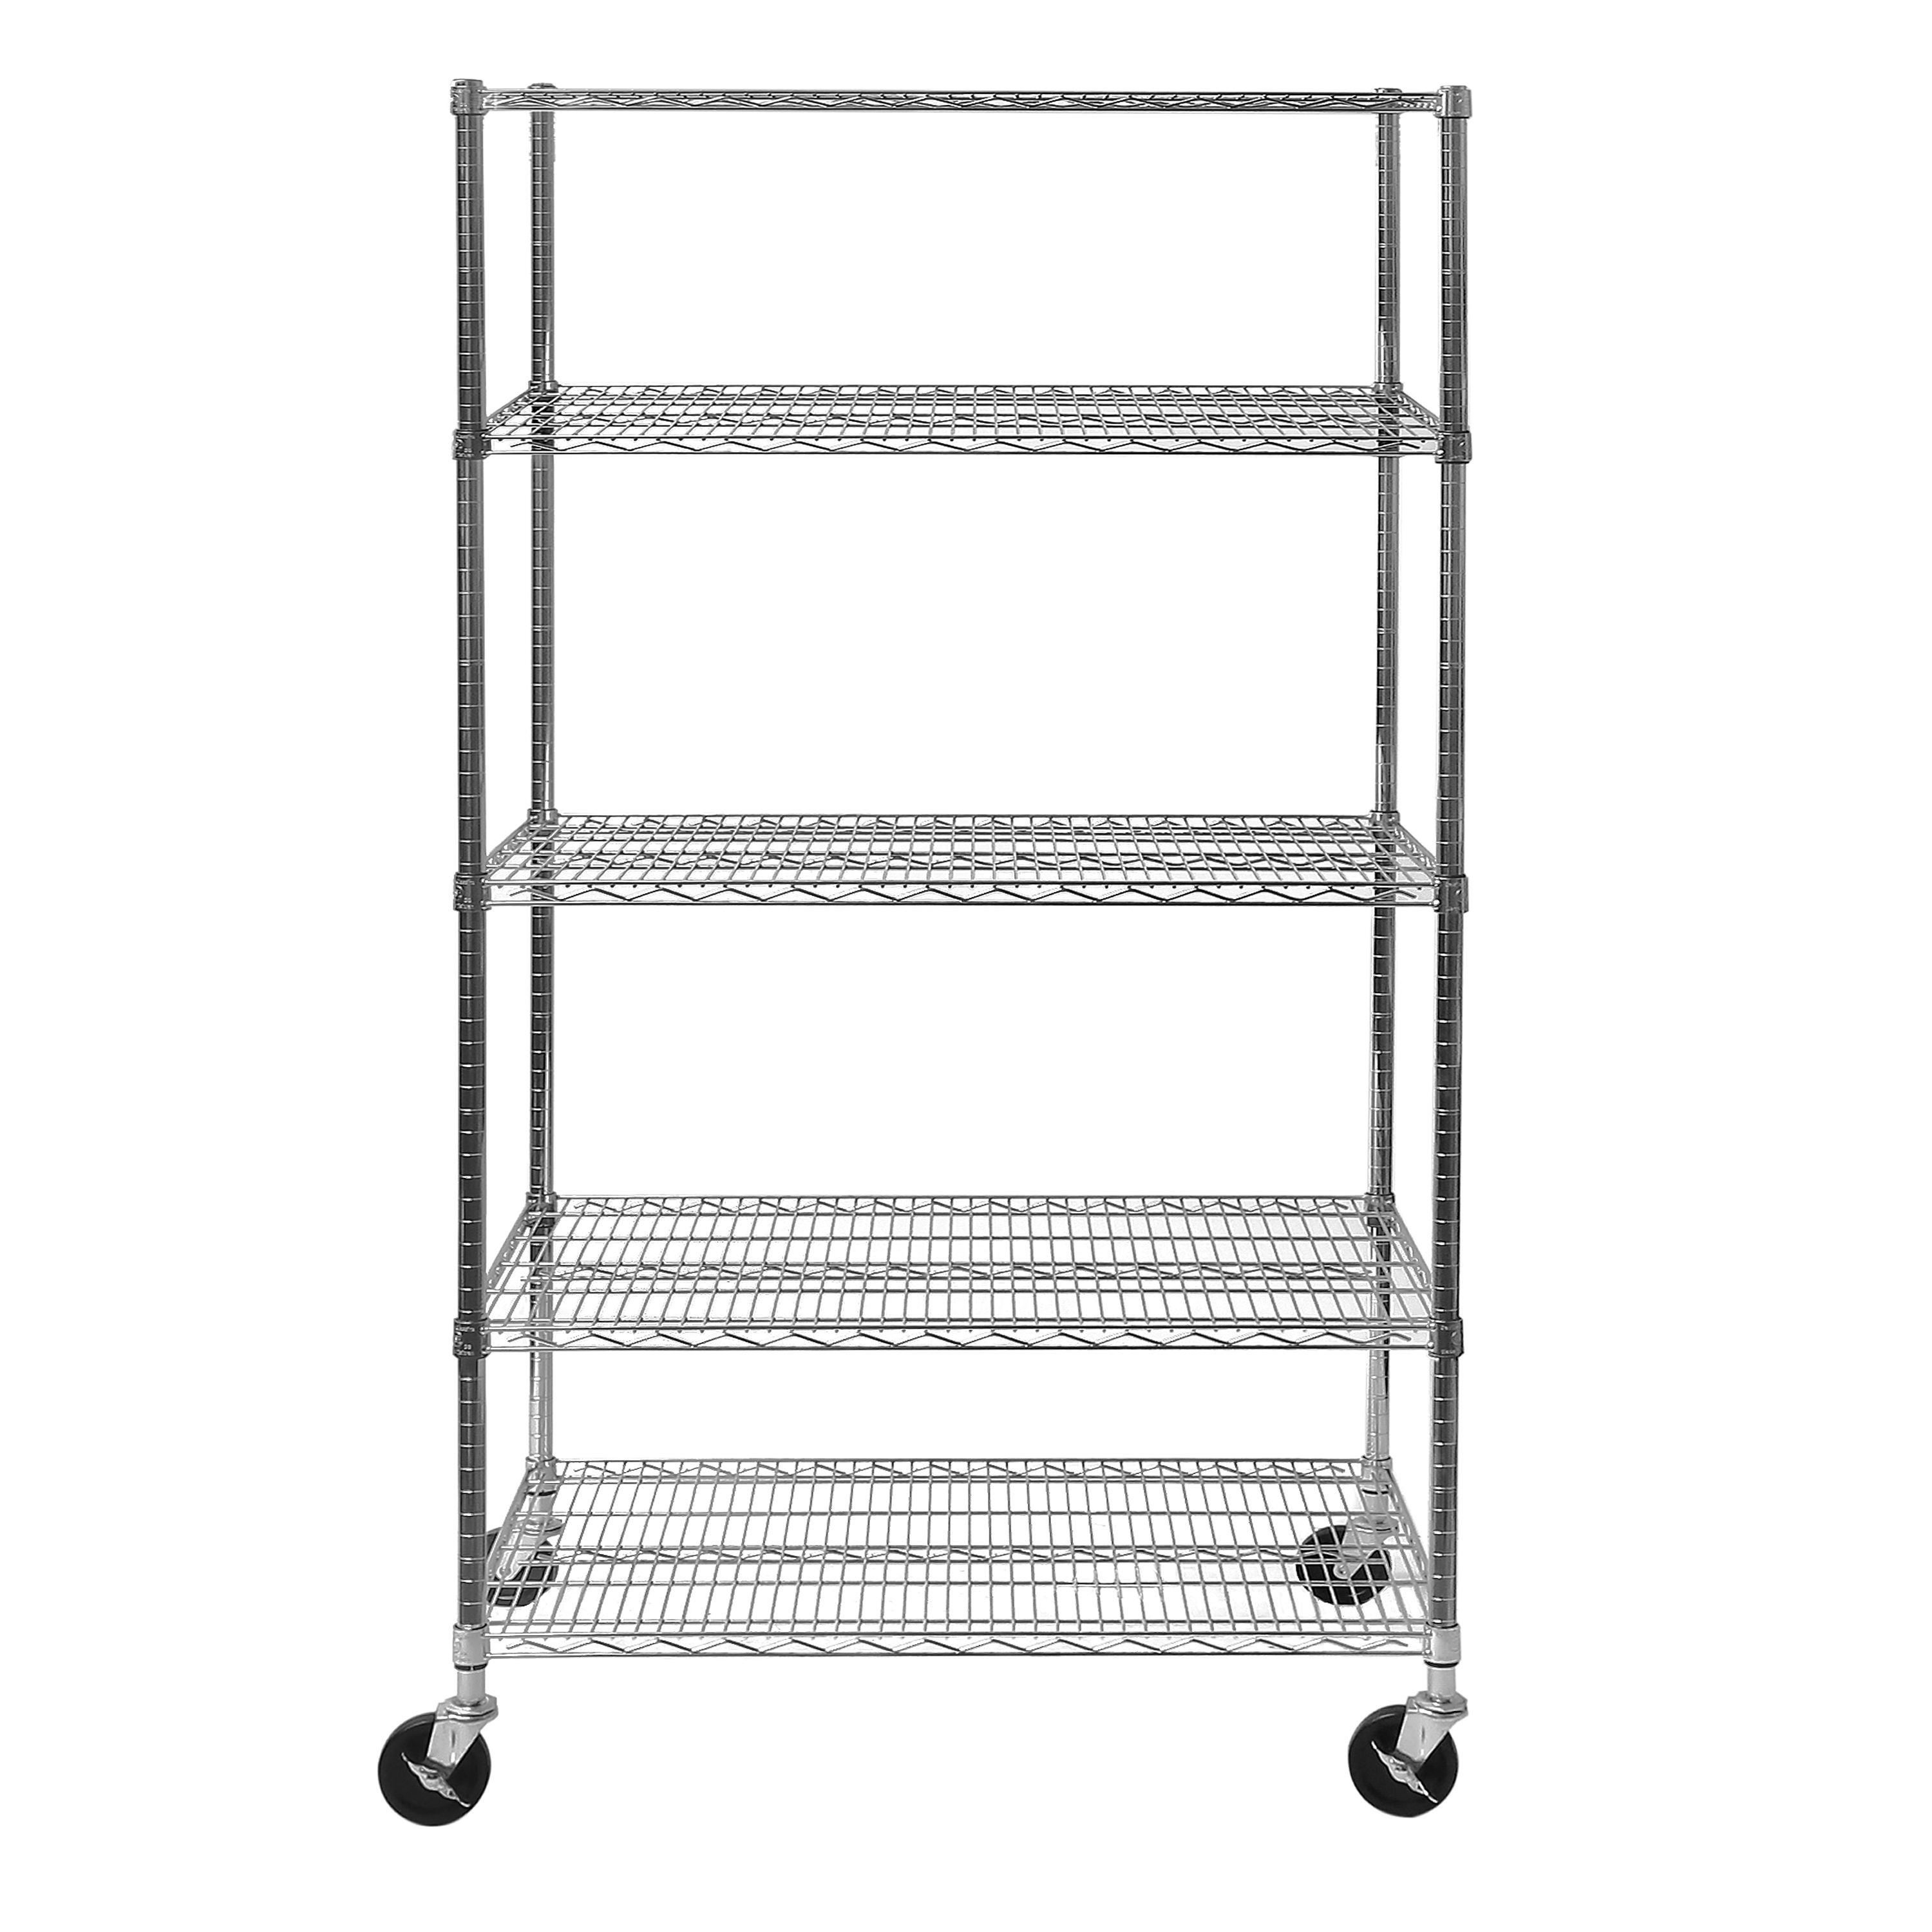 Seville Classics NSF 5-Tier Steel Wire Shelving 24 x 48 x 72